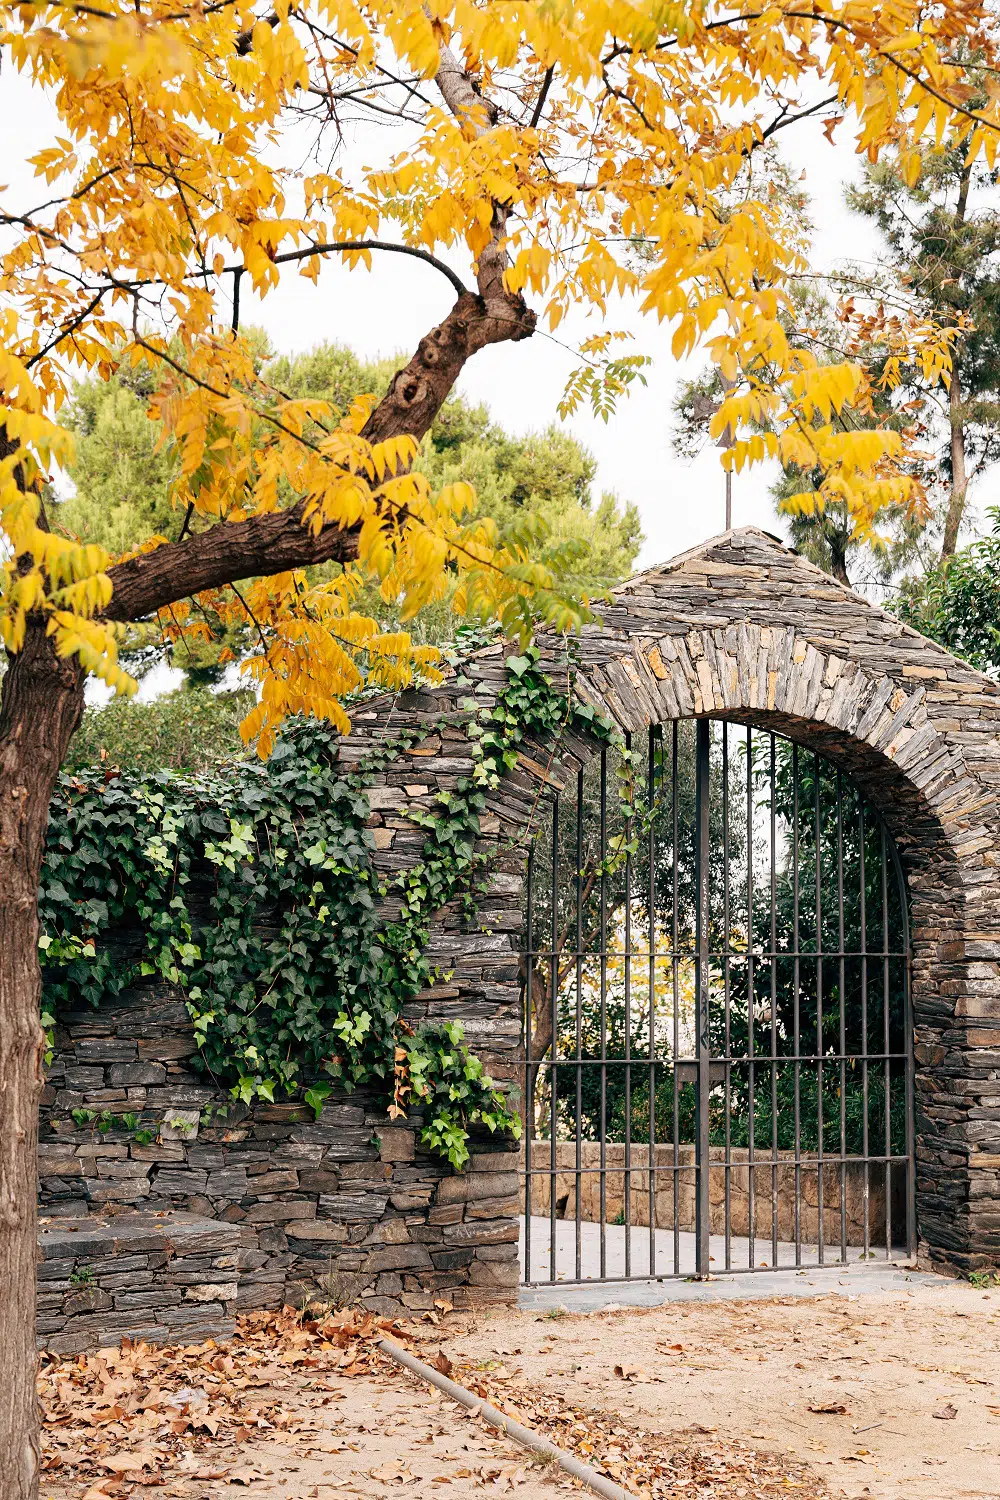 Metal gates in a stone fence under yellow autumn tree